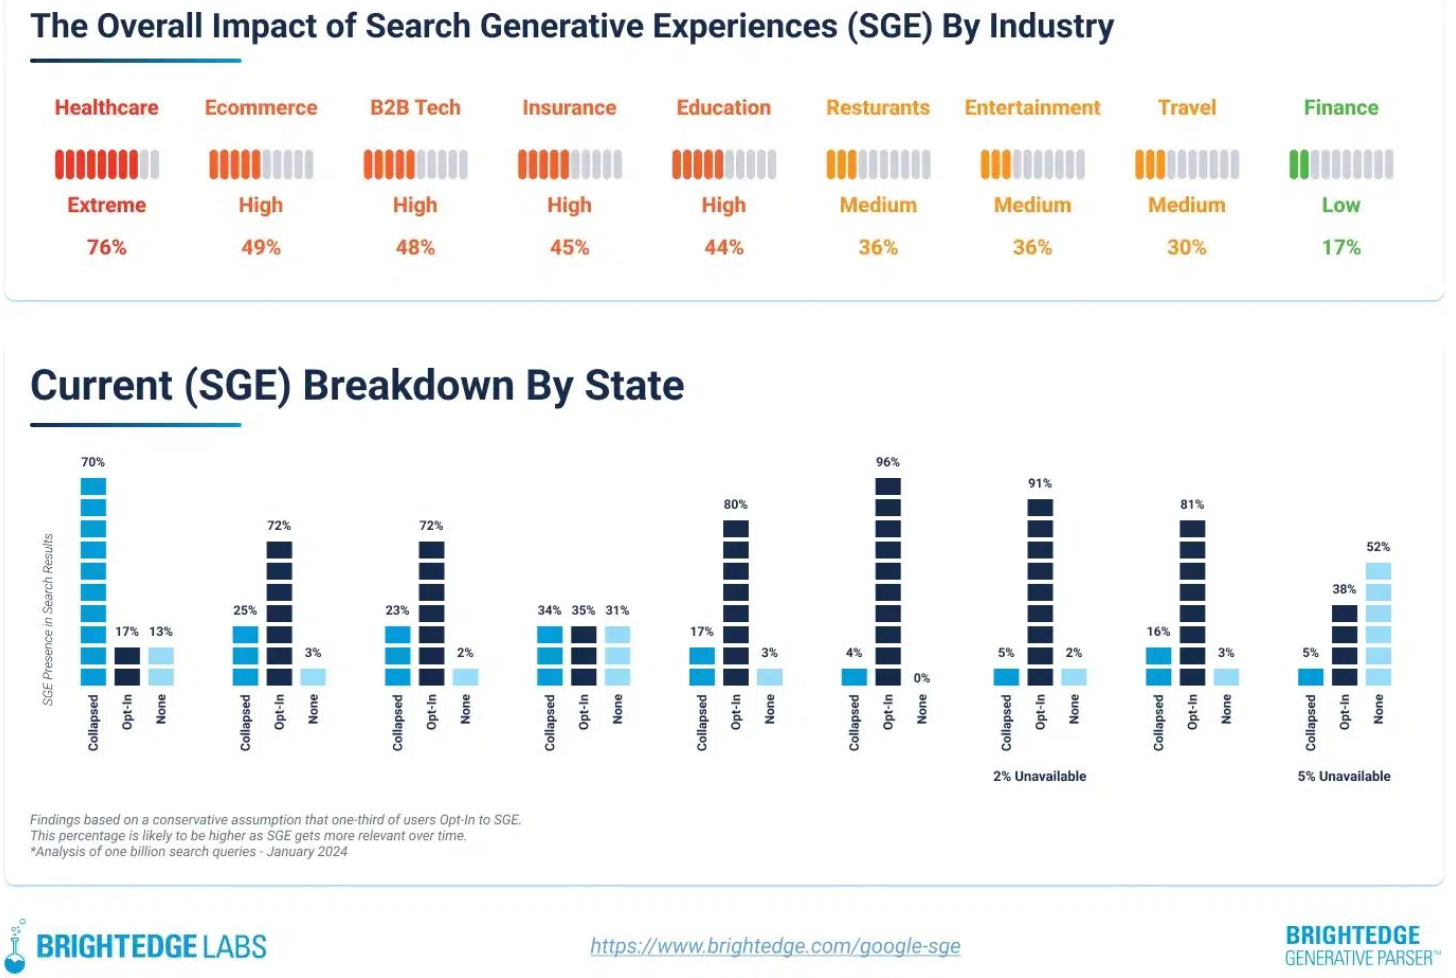 SGE impact on industry